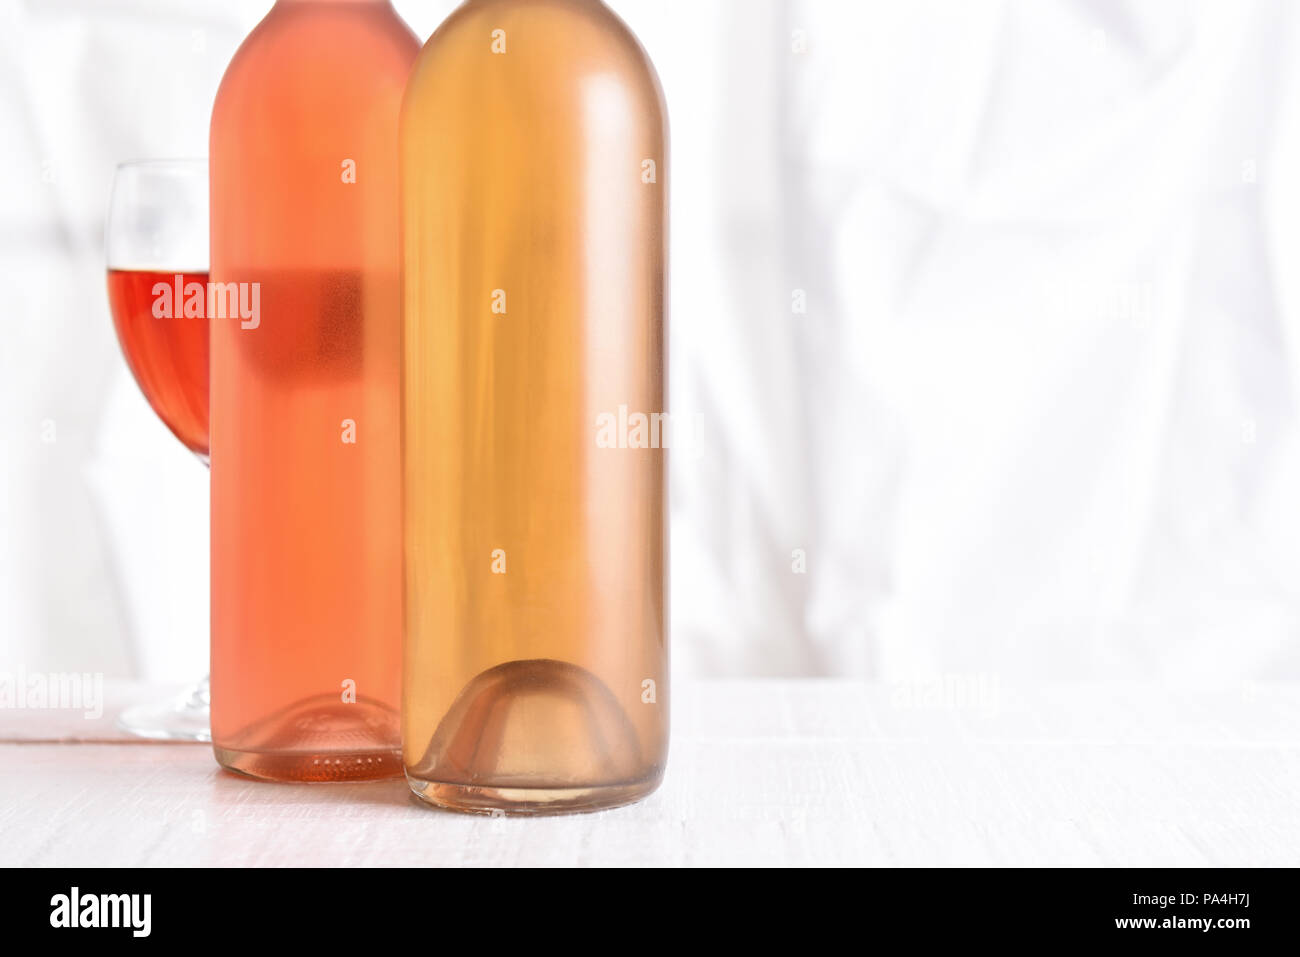 Wine Still Life: High key wine bottles on a white wood table in front of a window. Stock Photo